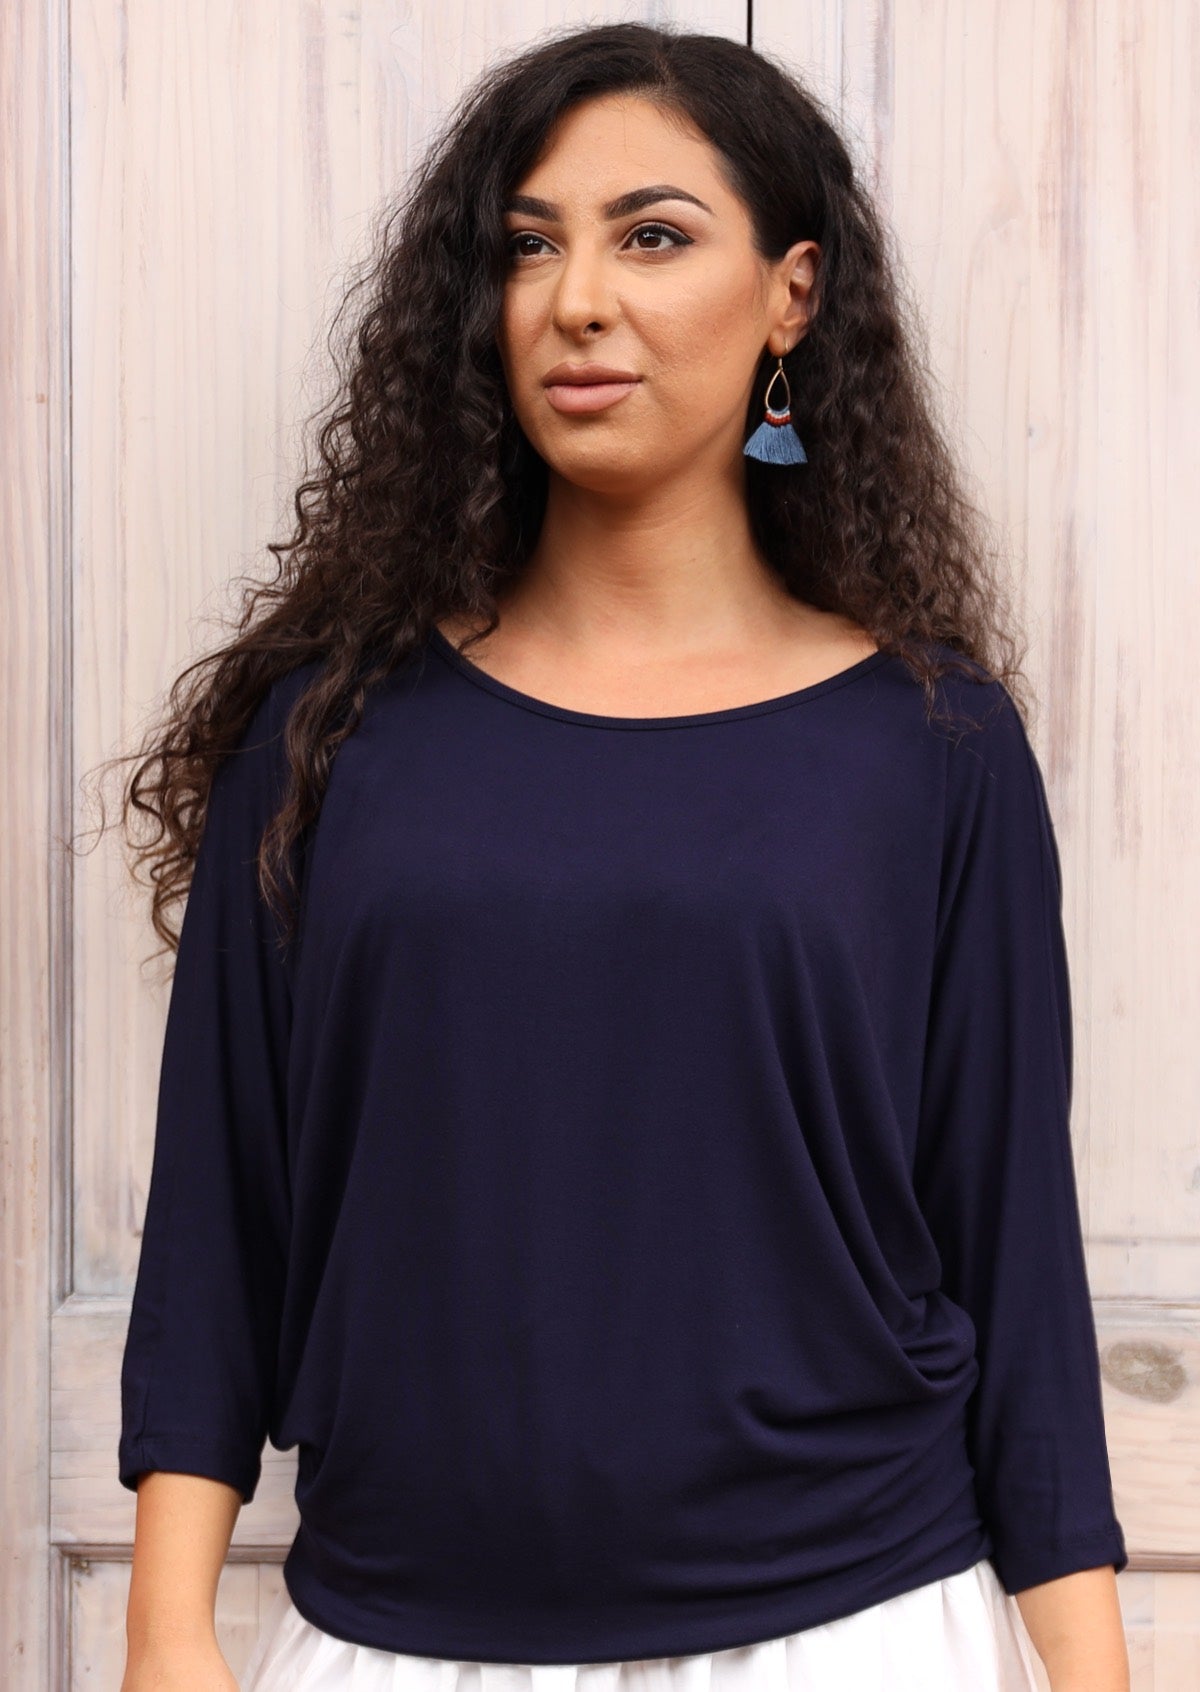 Woman with dark curly hair wearing a 3/4 sleeve rayon batwing round neckline navy blue top.